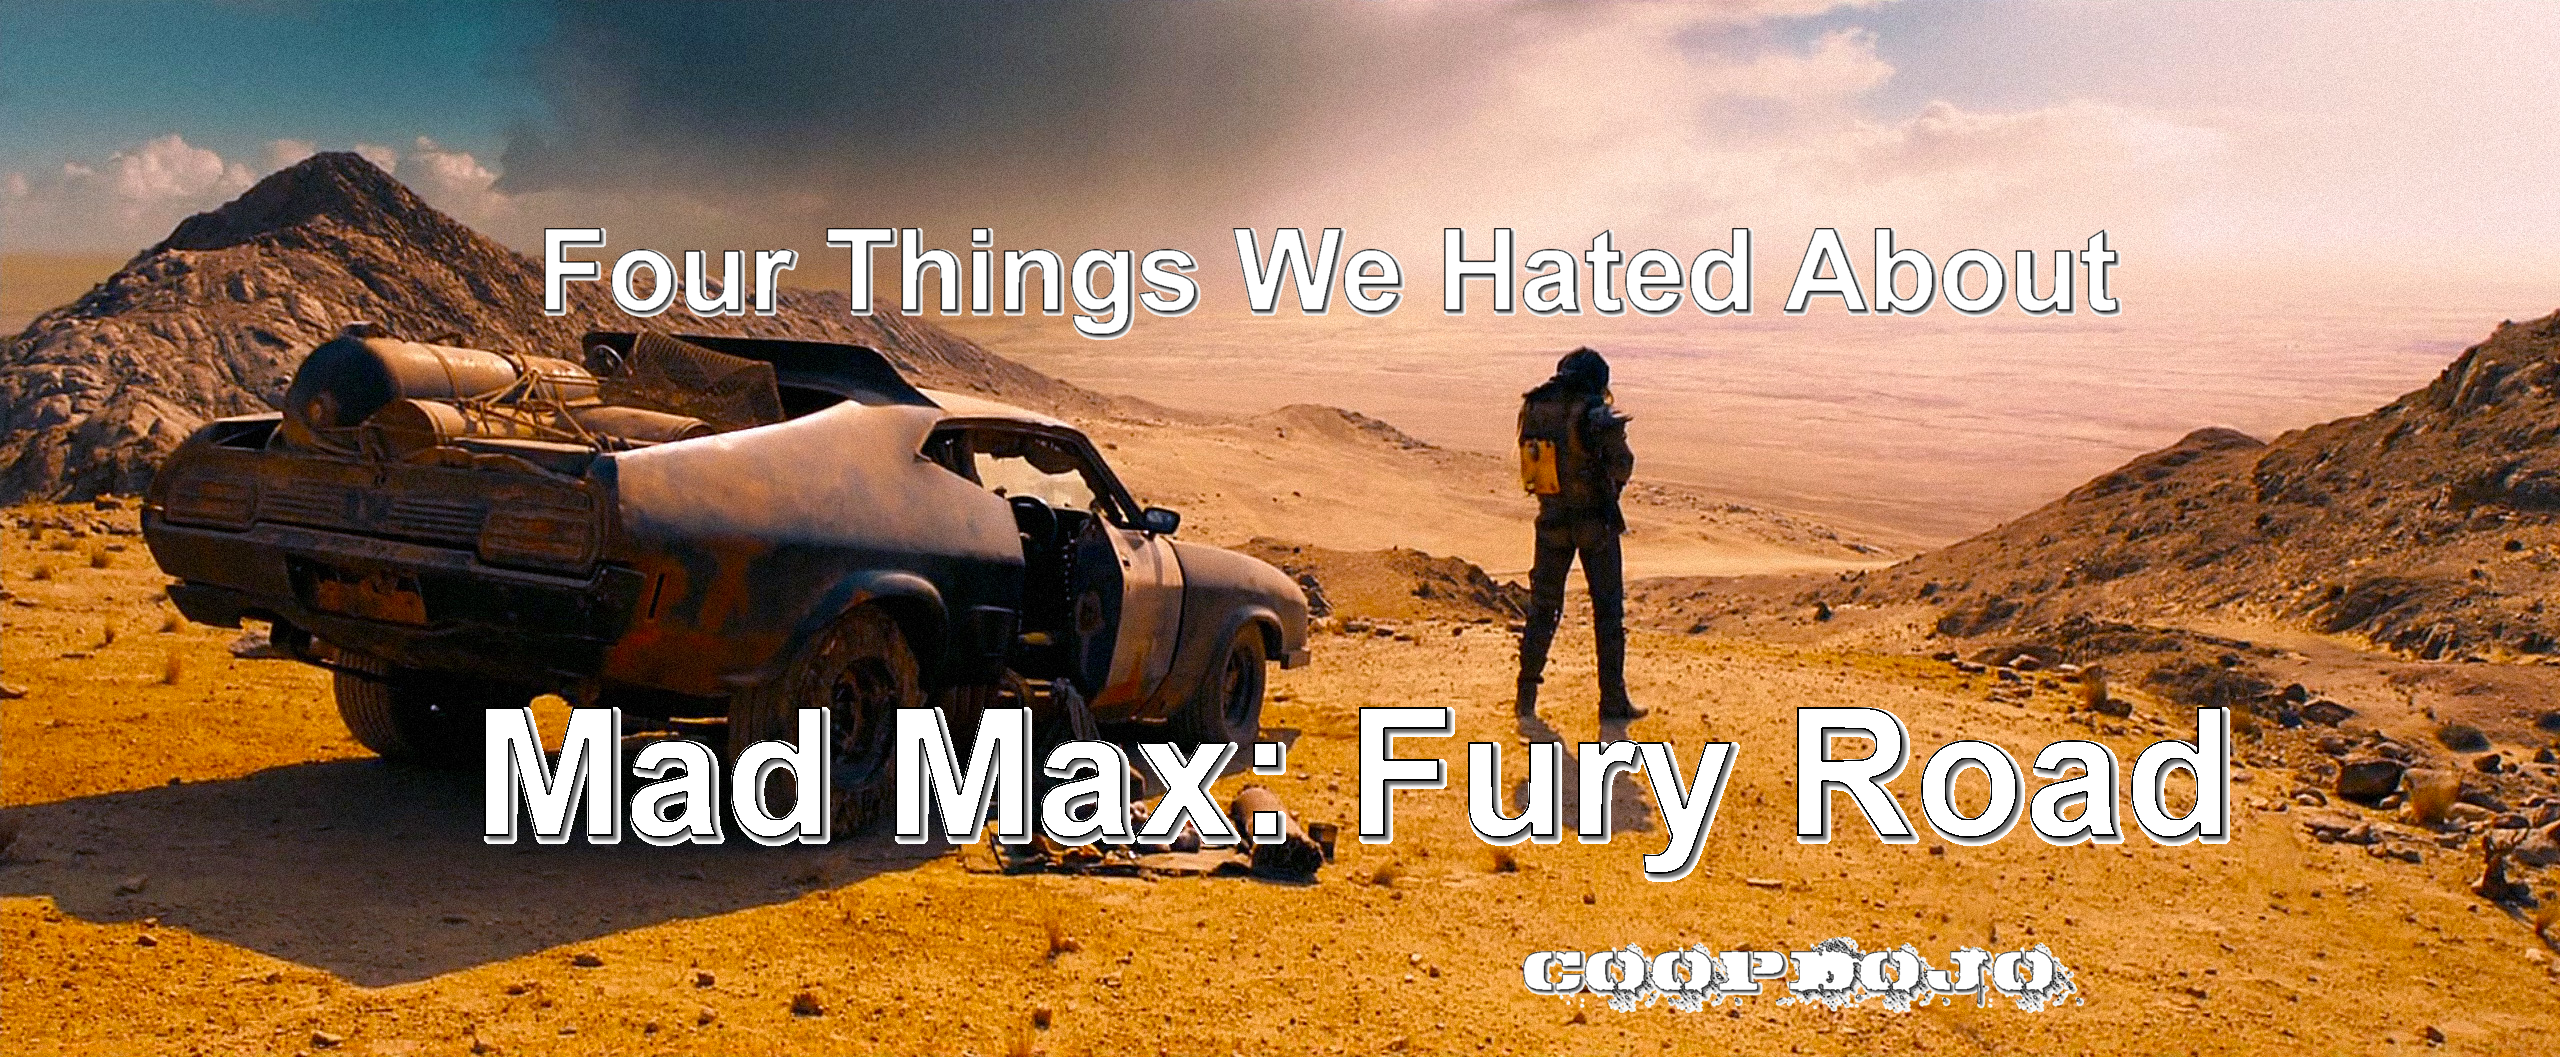 Four Things We Hated About Mad Max Fury Road